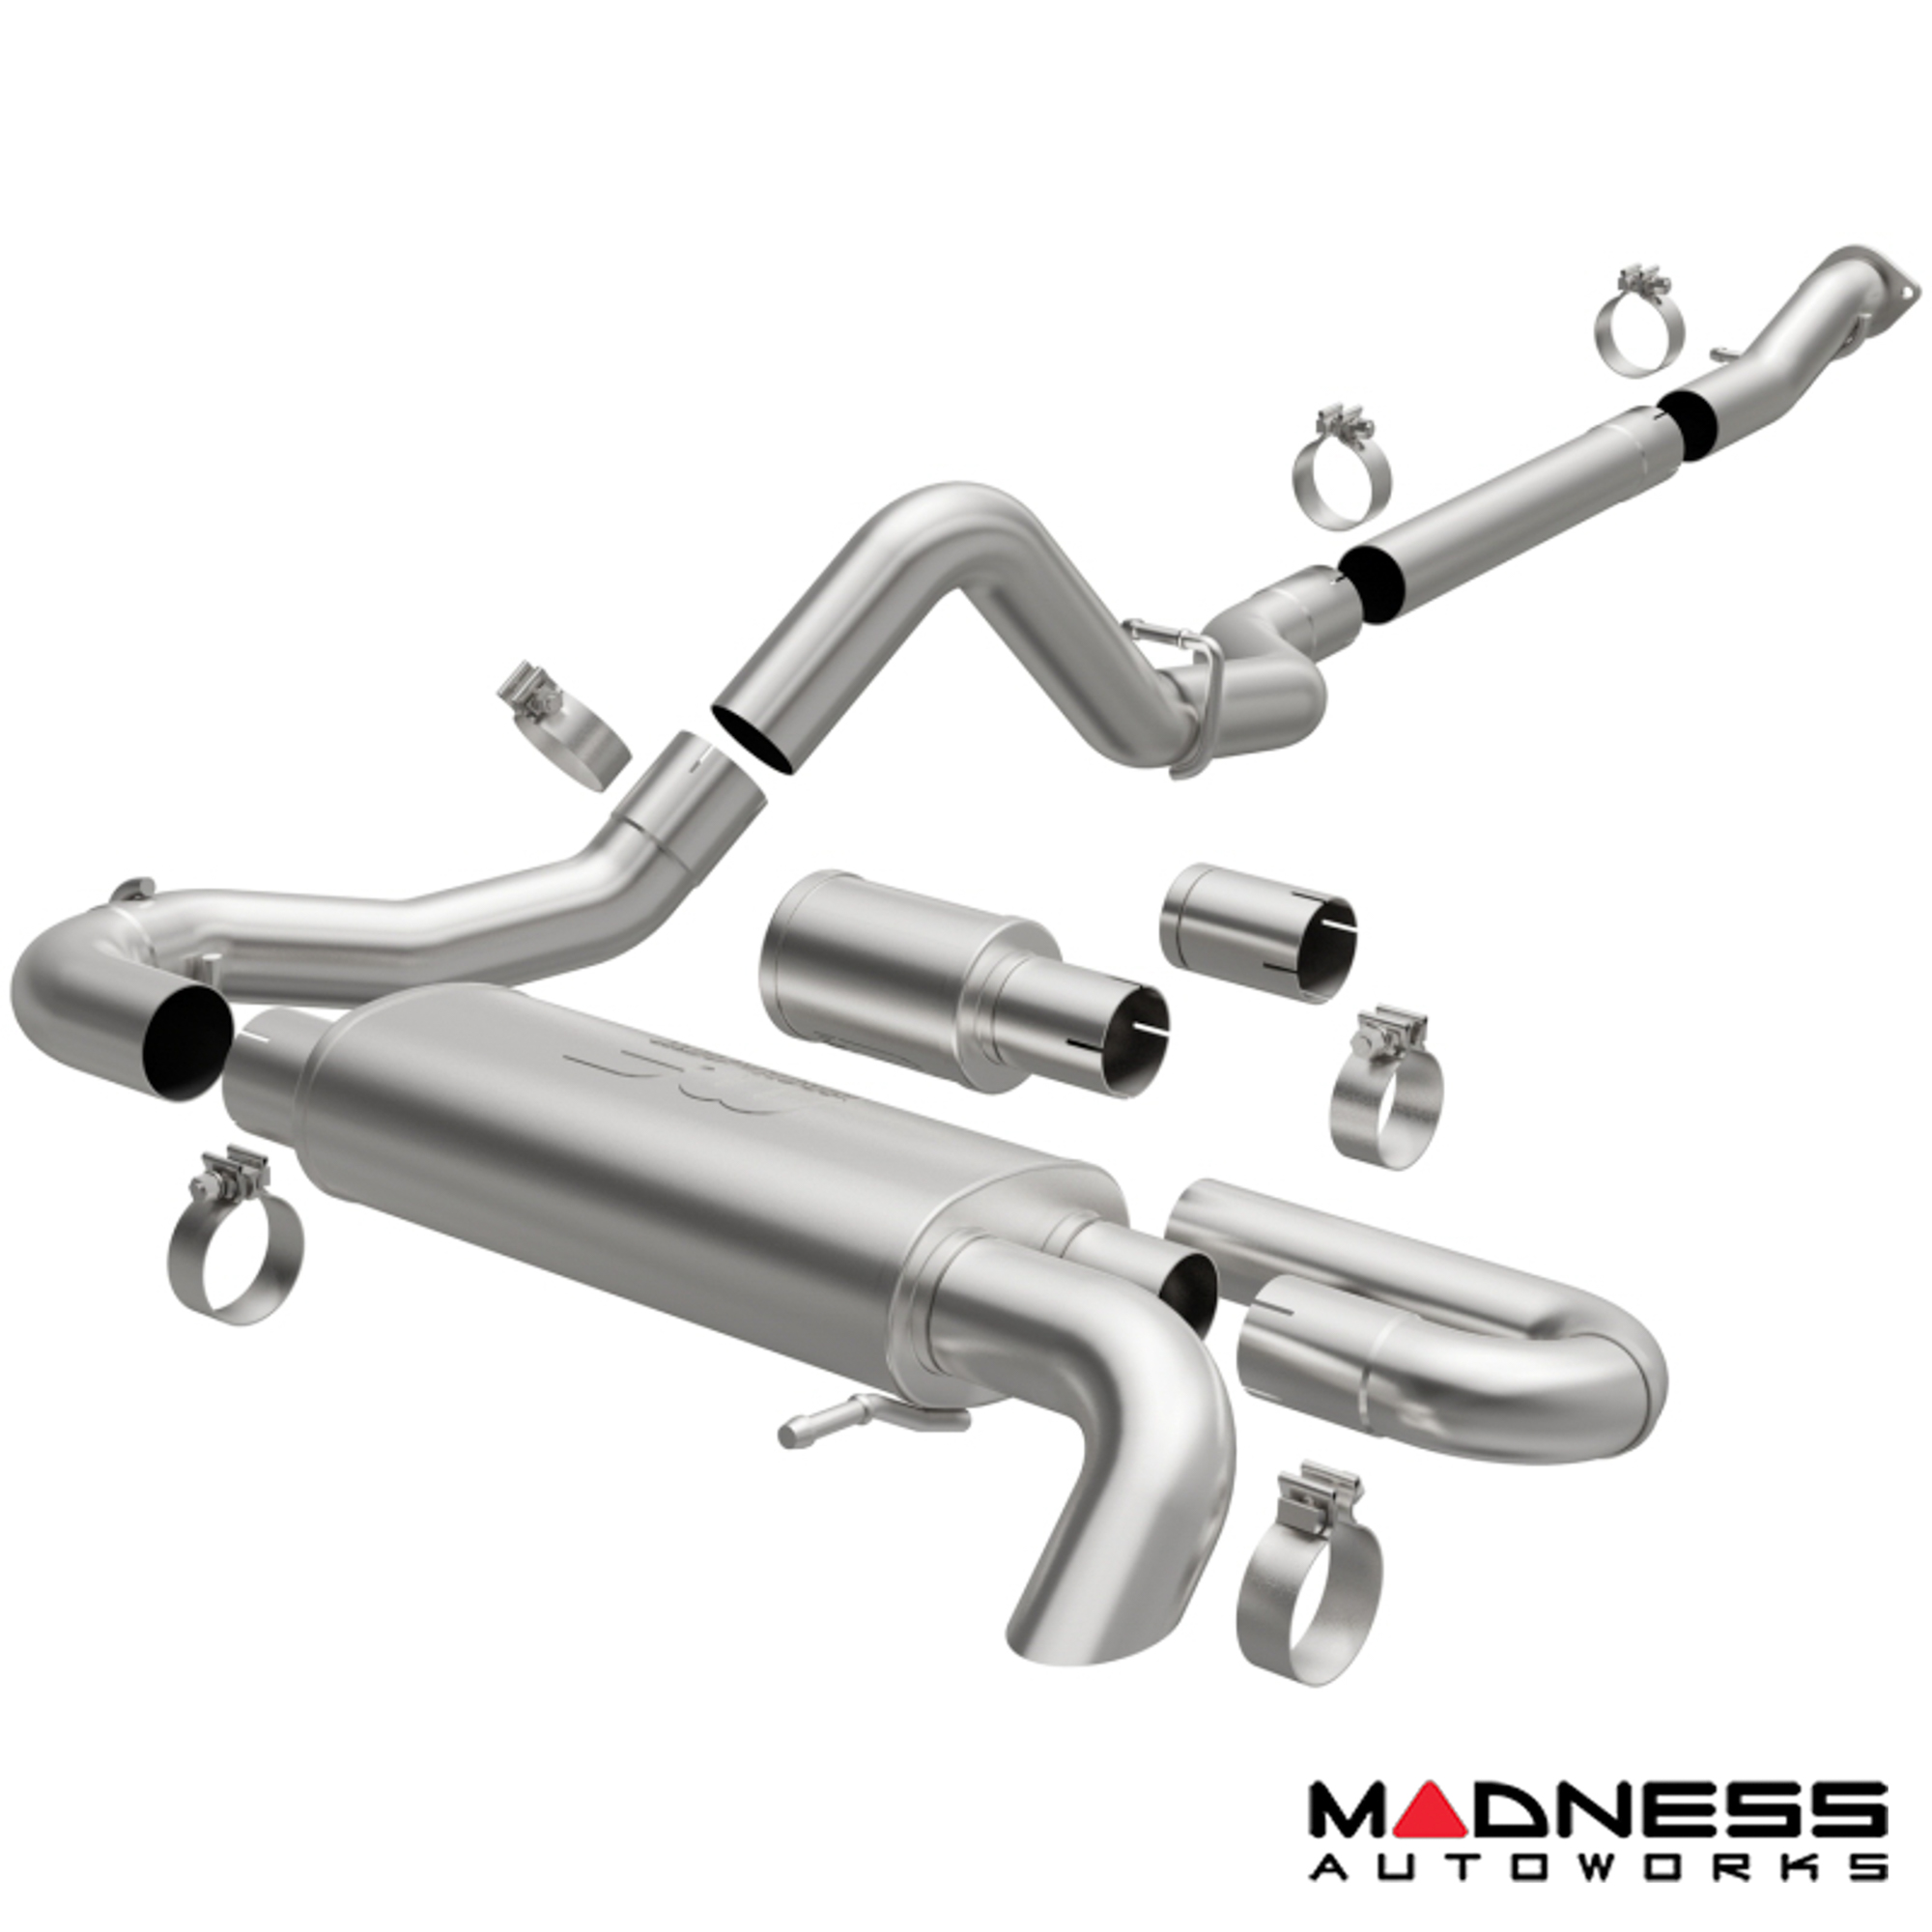 Ford Bronco Performance Exhaust System - Cat Back - Single Exit - Magnaflow - 2.5" Overland Series